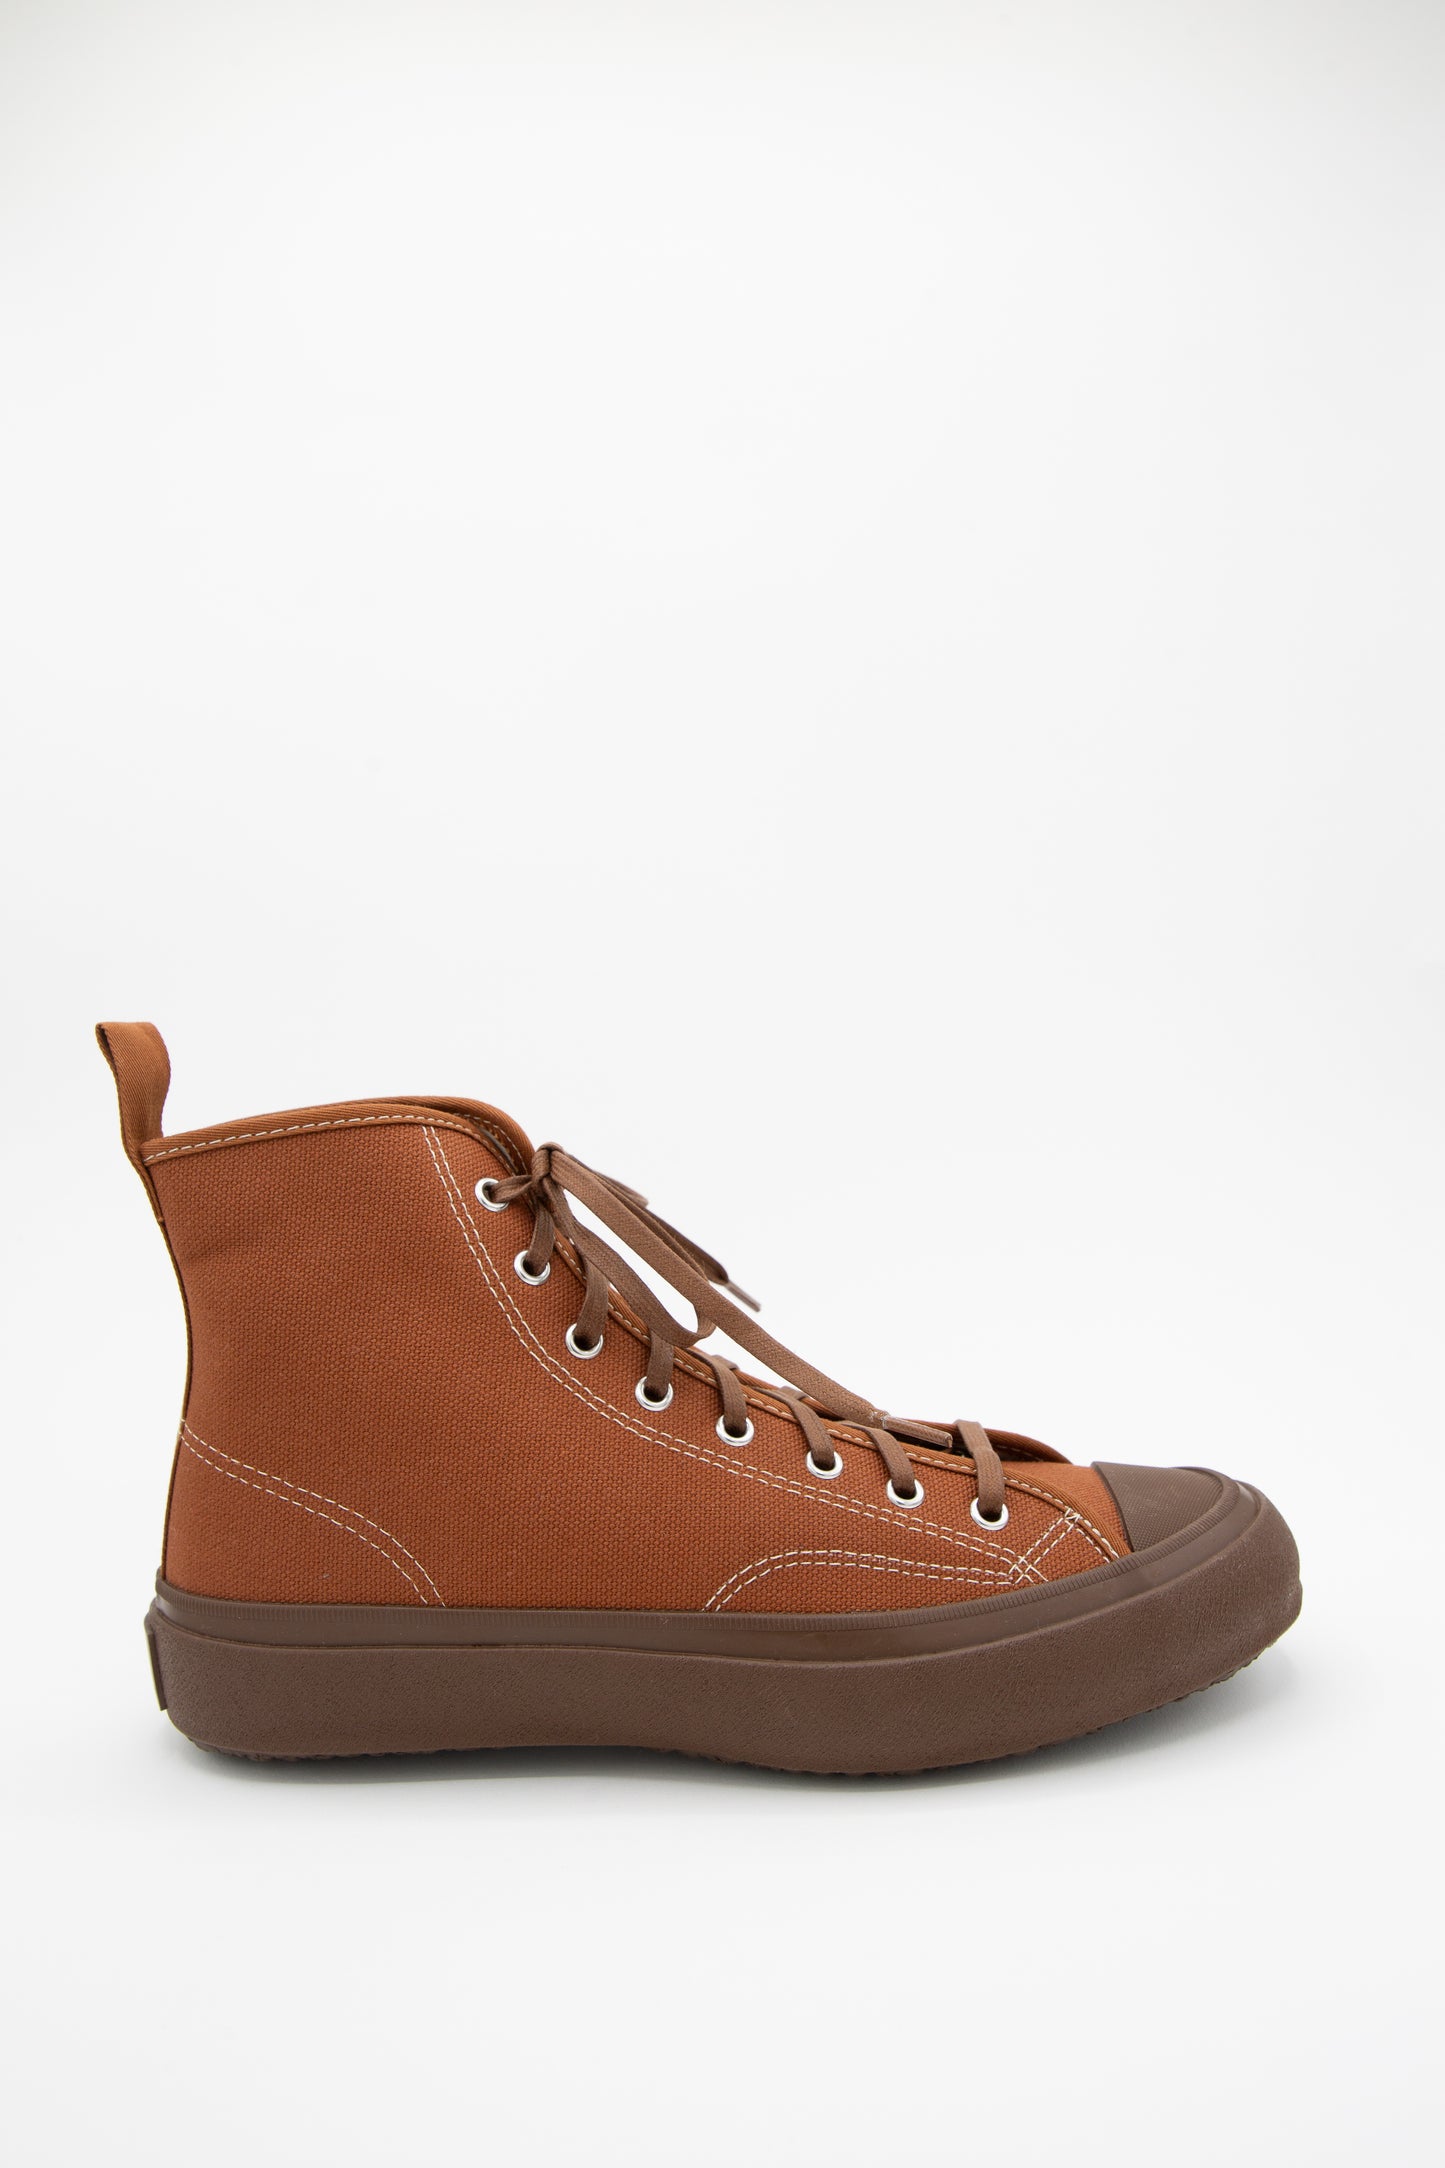 The Hibasket Sneaker in Brown by Moonstar features a canvas upper and rubber sole. It is a hi-top sneaker.